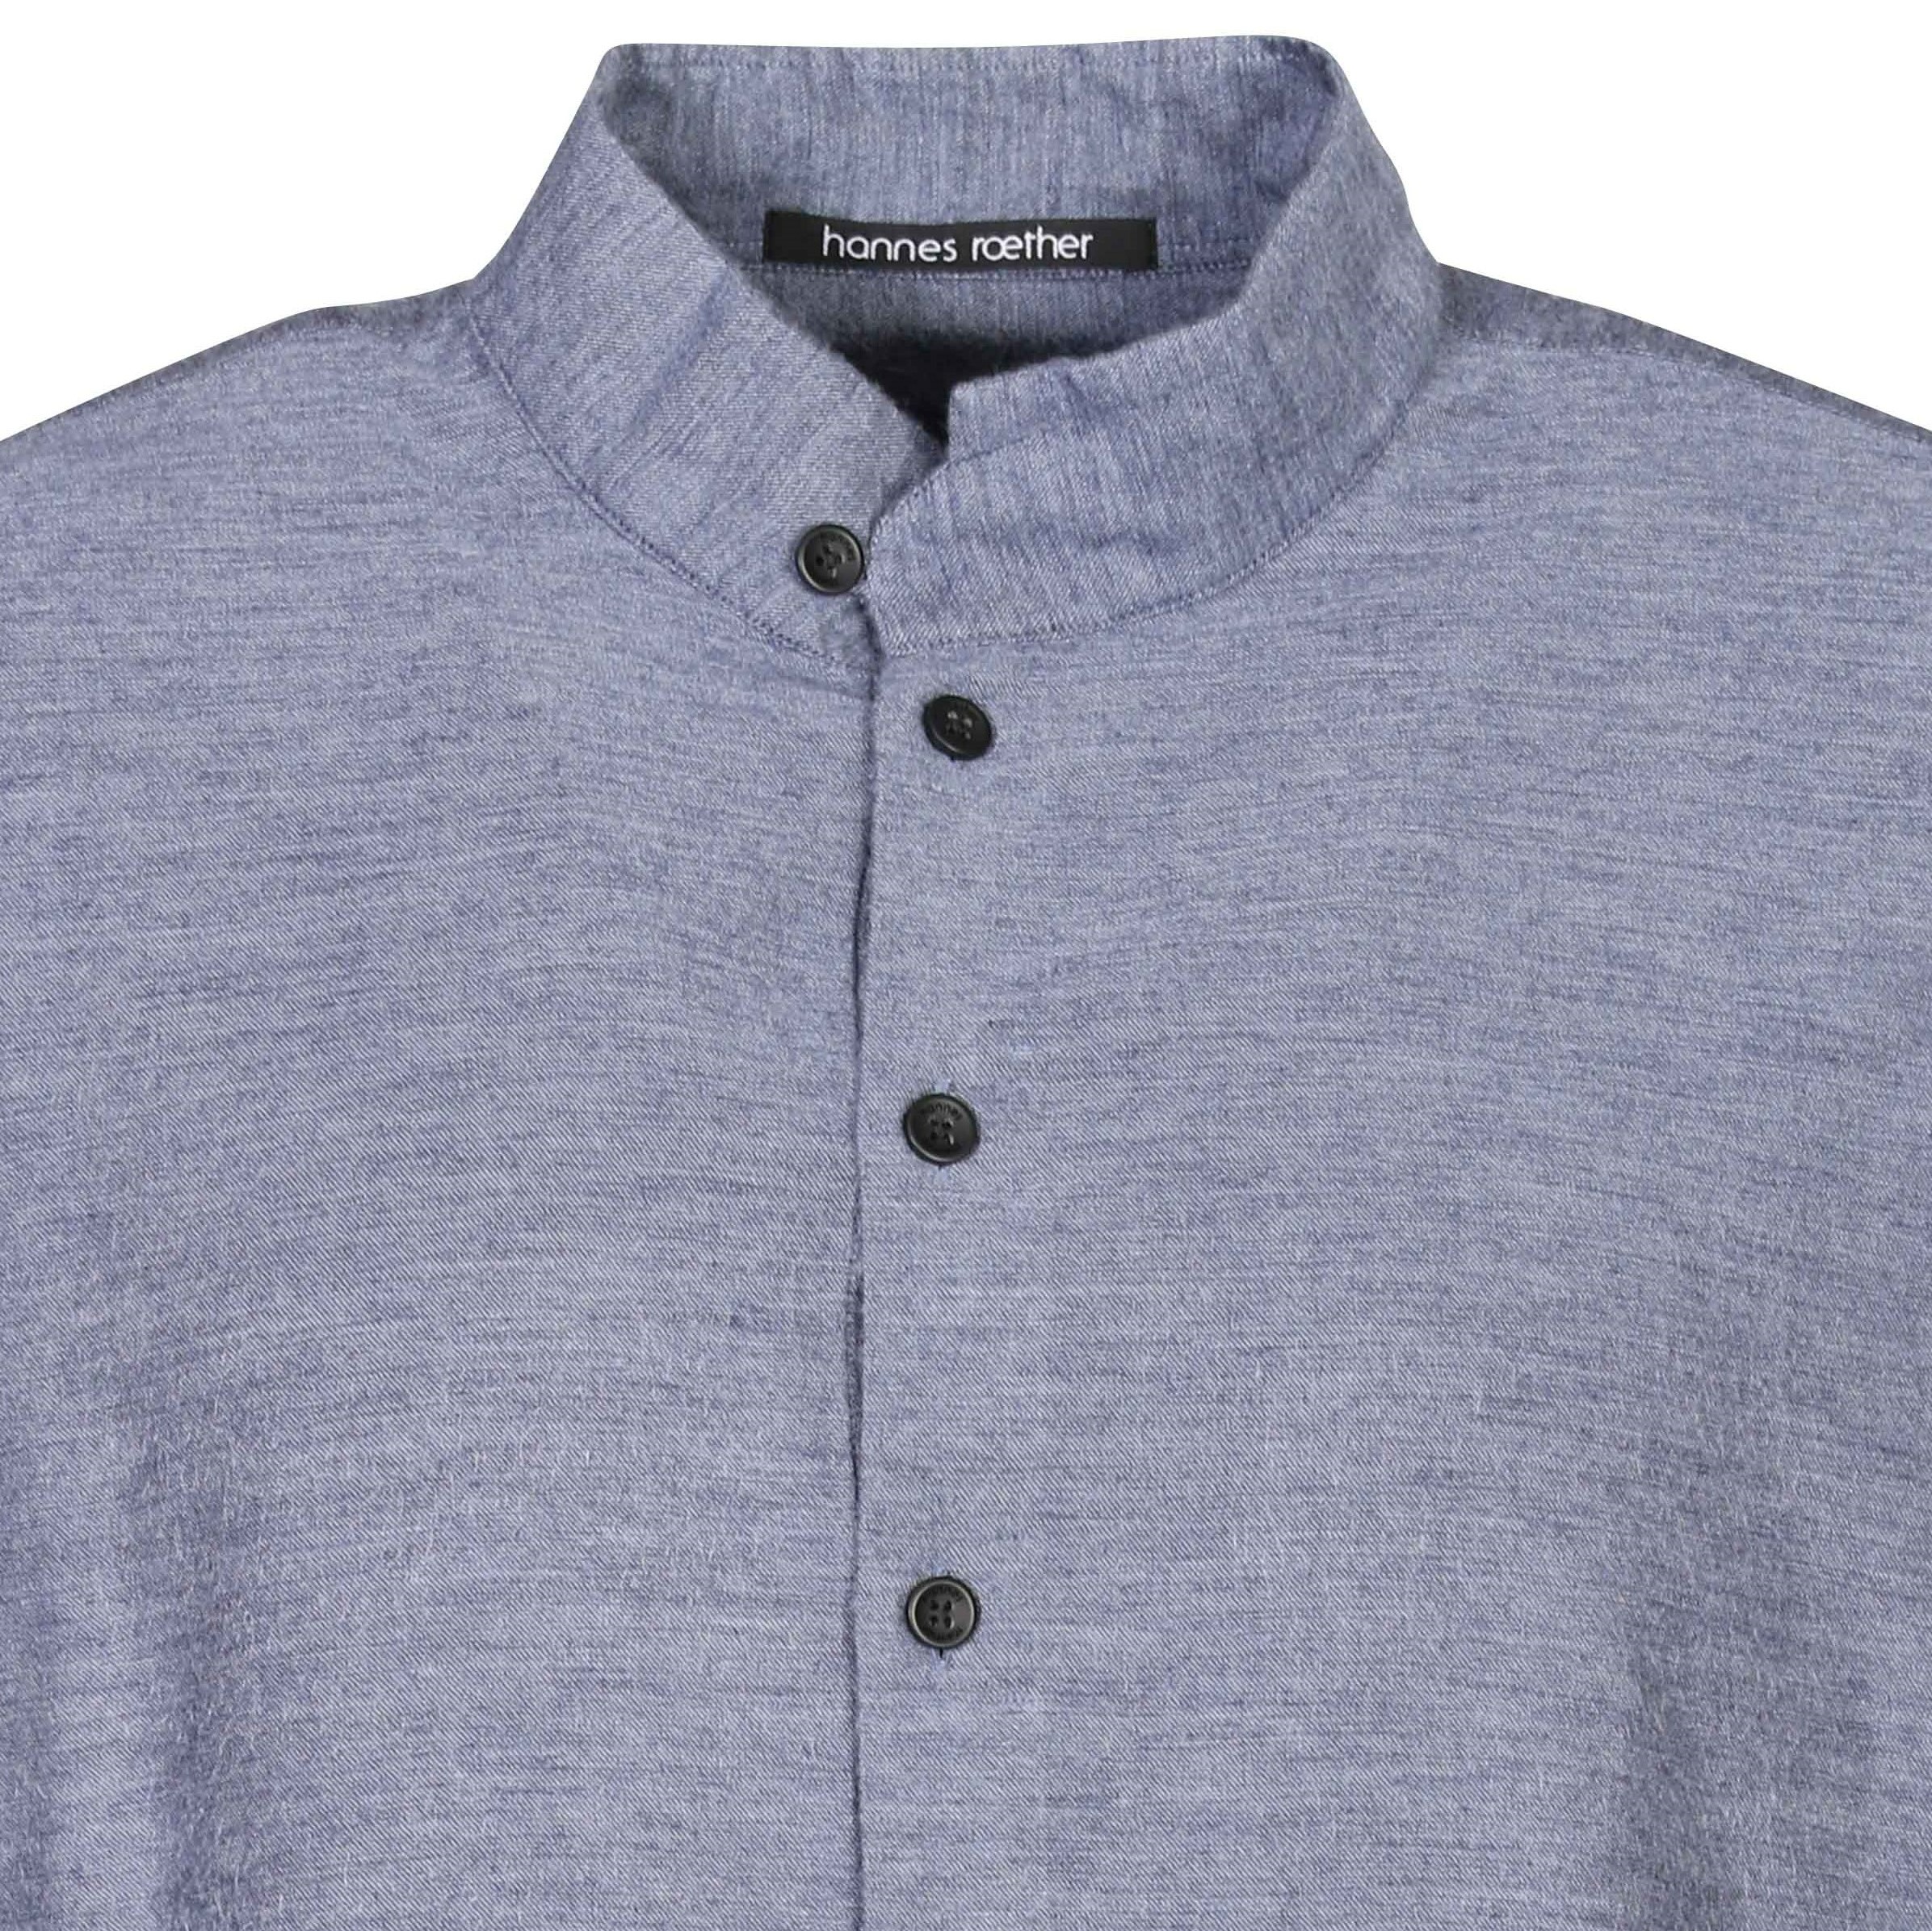 Hannes Roether Shirt in Blue